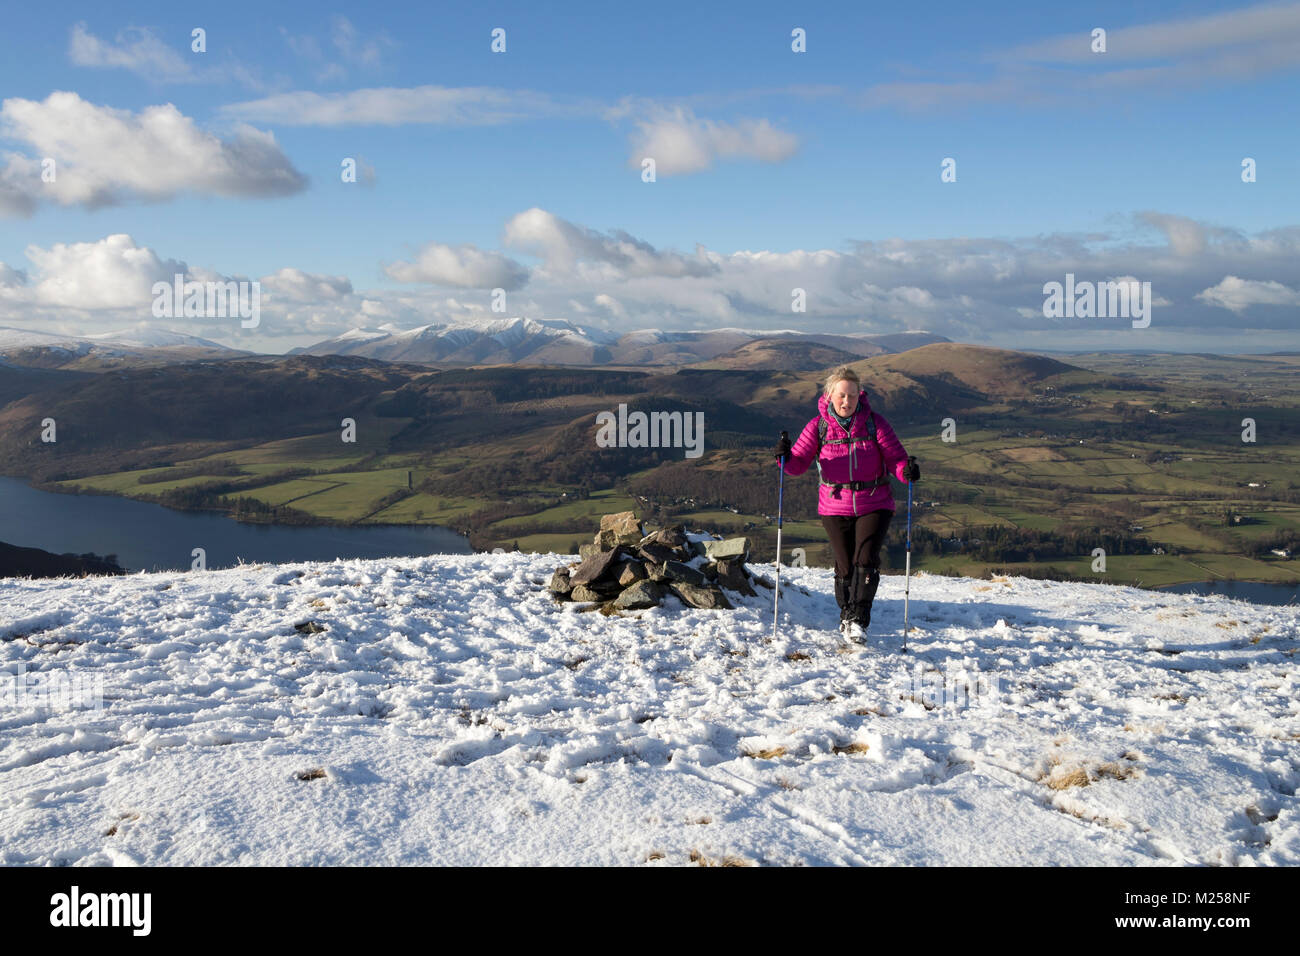 Lake District, Cumbria, UK.  4th February 2018. UK Weather.  Hill walkers enjoyed some wonderful snowy walking conditions and spectacular views over the Ullswater valley in the Lake District today.  The forecast is for continuing cold temperatures and further snow, some of which could affect Southern areas of the UK.  David Forster/Alamy Live News Stock Photo